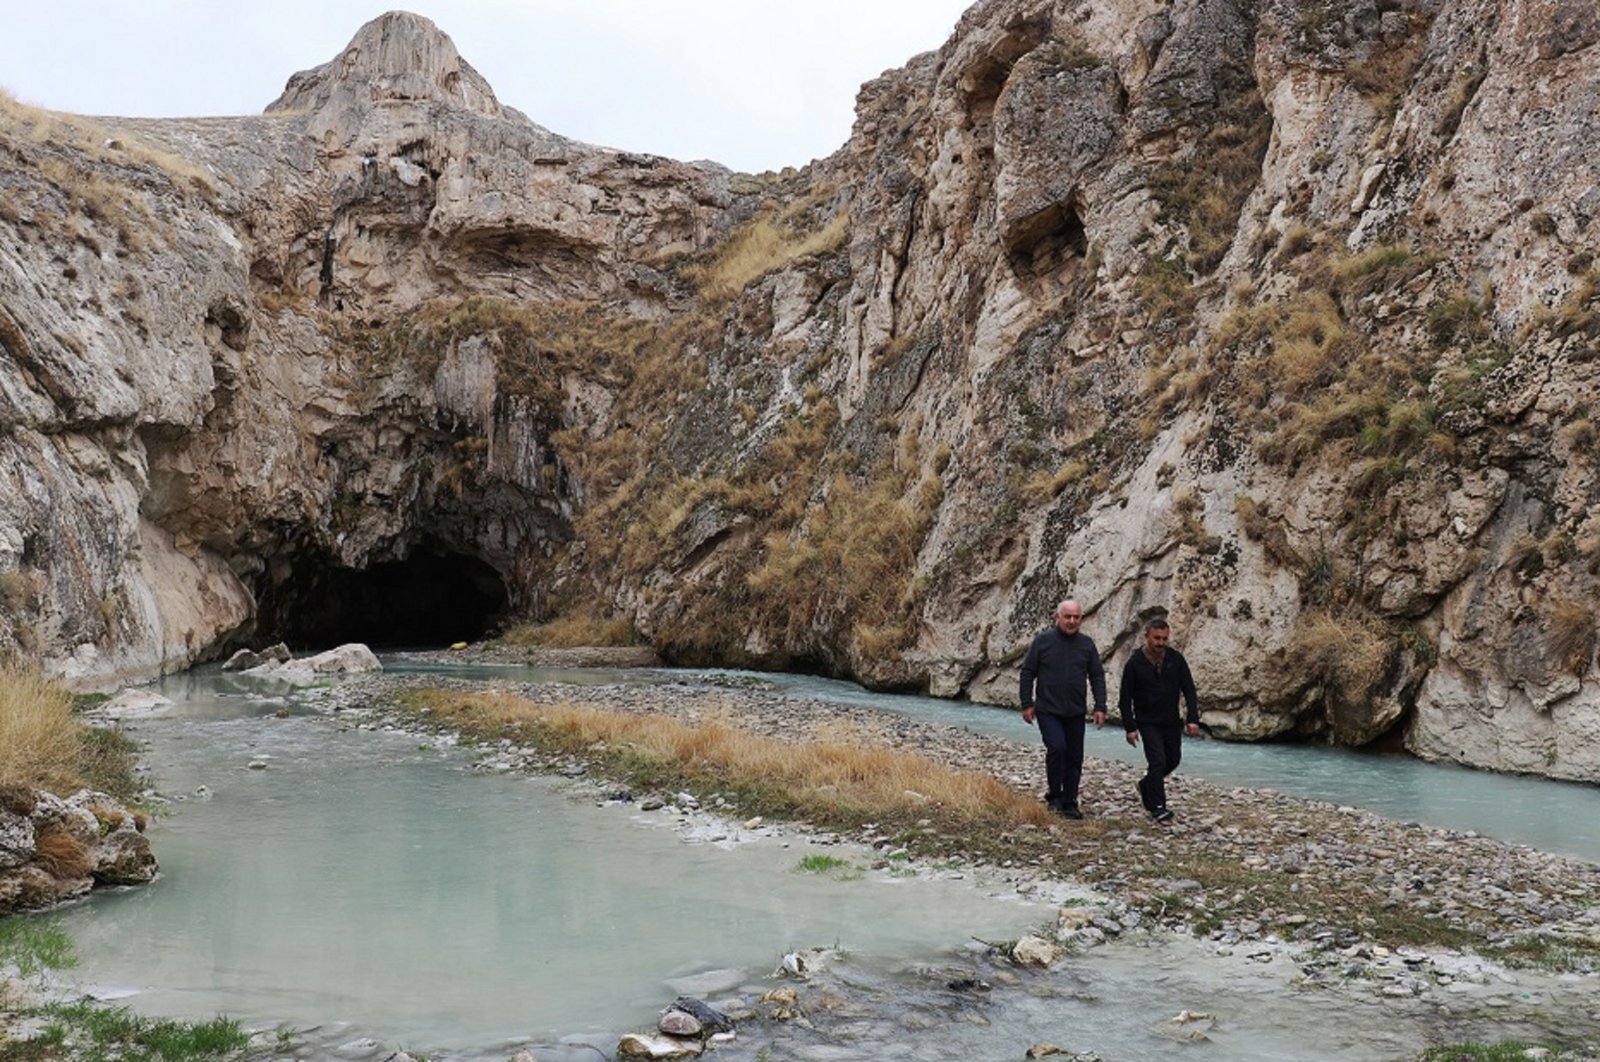 The research team formed through the cooperation of Ağrı Ibrahim Çeçen University (AIÇU) and Istanbul Technical University (ITU) starts to work in the area where Noah&#039;s Ark&#039;s remnants are believed to located, Ağrı, Türkiye, Nov. 21, 2022. (IHA Photo)